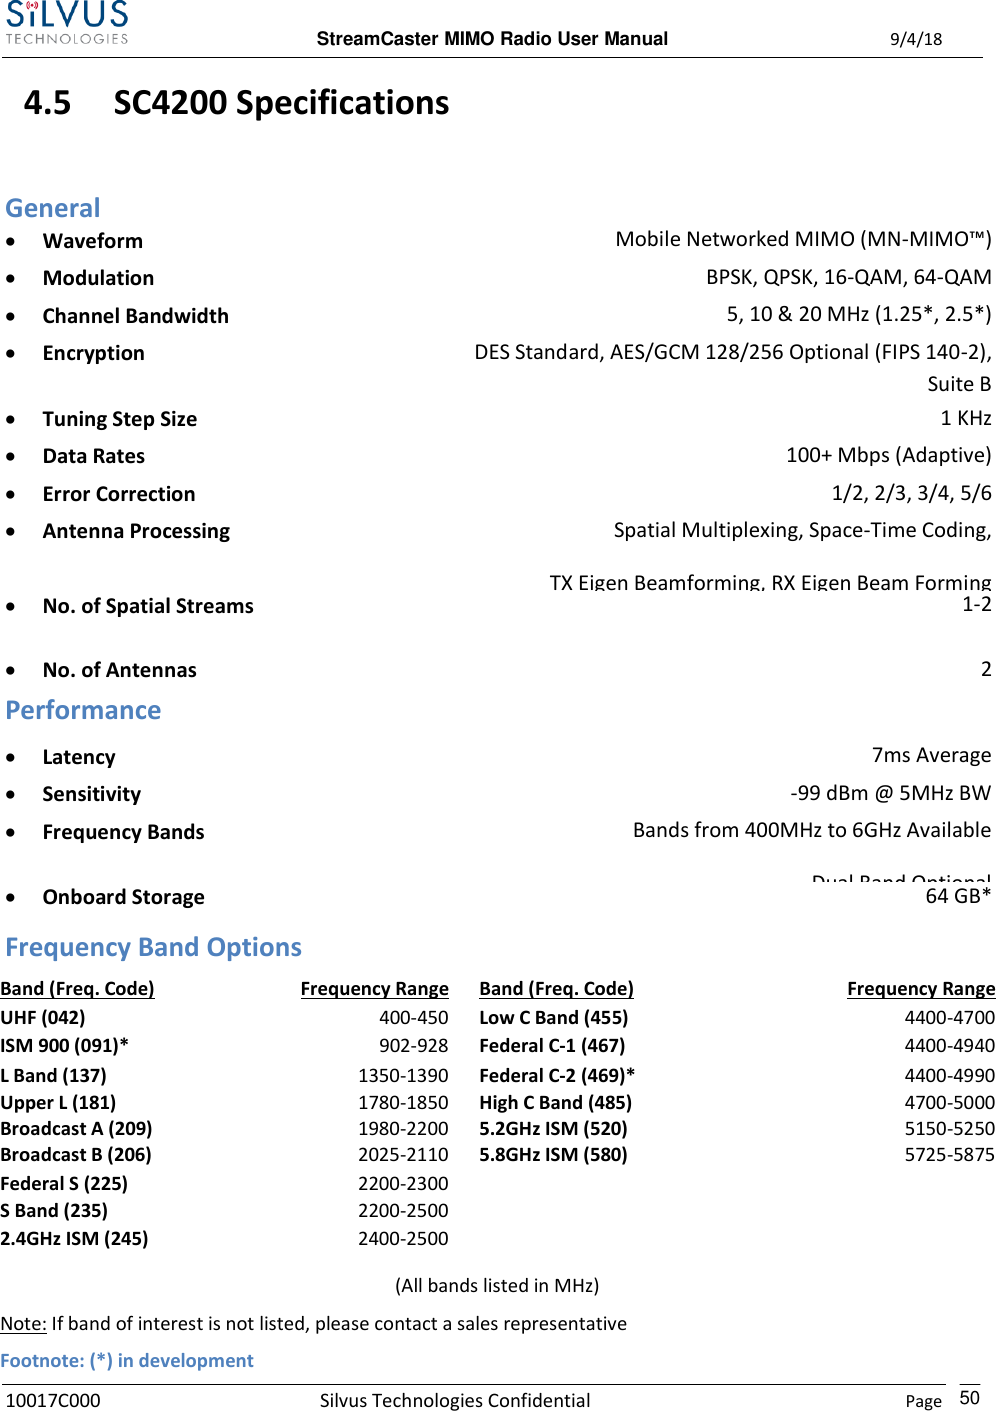  StreamCaster MIMO Radio User Manual  9/4/18 10017C000 Silvus Technologies Confidential    Page    50 4.5 SC4200 Specifications General  Waveform Mobile Networked MIMO (MN-MIMO™)  Modulation BPSK, QPSK, 16-QAM, 64-QAM  Channel Bandwidth 5, 10 &amp; 20 MHz (1.25*, 2.5*)  Encryption DES Standard, AES/GCM 128/256 Optional (FIPS 140-2), Suite B  Tuning Step Size 1 KHz  Data Rates 100+ Mbps (Adaptive)  Error Correction 1/2, 2/3, 3/4, 5/6  Antenna Processing Spatial Multiplexing, Space-Time Coding, TX Eigen Beamforming, RX Eigen Beam Forming  No. of Spatial Streams 1-2  No. of Antennas  Total Power Output 2 1mW – 4W (variable) (up to 8W Effective w/ TX Beamforming)   Performance   Latency 7ms Average  Sensitivity -99 dBm @ 5MHz BW  Frequency Bands Bands from 400MHz to 6GHz Available Dual Band Optional  Onboard Storage 64 GB* Frequency Band Options  Band (Freq. Code) Frequency Range  Band (Freq. Code) Frequency Range UHF (042) 400-450   Low C Band (455) 4400-4700 ISM 900 (091)* 902-928   Federal C-1 (467) 4400-4940 L Band (137) 1350-1390   Federal C-2 (469)* 4400-4990 Upper L (181) 1780-1850  High C Band (485) 4700-5000 Broadcast A (209) 1980-2200  5.2GHz ISM (520) 5150-5250 Broadcast B (206) 2025-2110   5.8GHz ISM (580) 5725-5875 Federal S (225) 2200-2300     S Band (235) 2200-2500       2.4GHz ISM (245) 2400-2500          (All bands listed in MHz) Note: If band of interest is not listed, please contact a sales representative  Footnote: (*) in development      